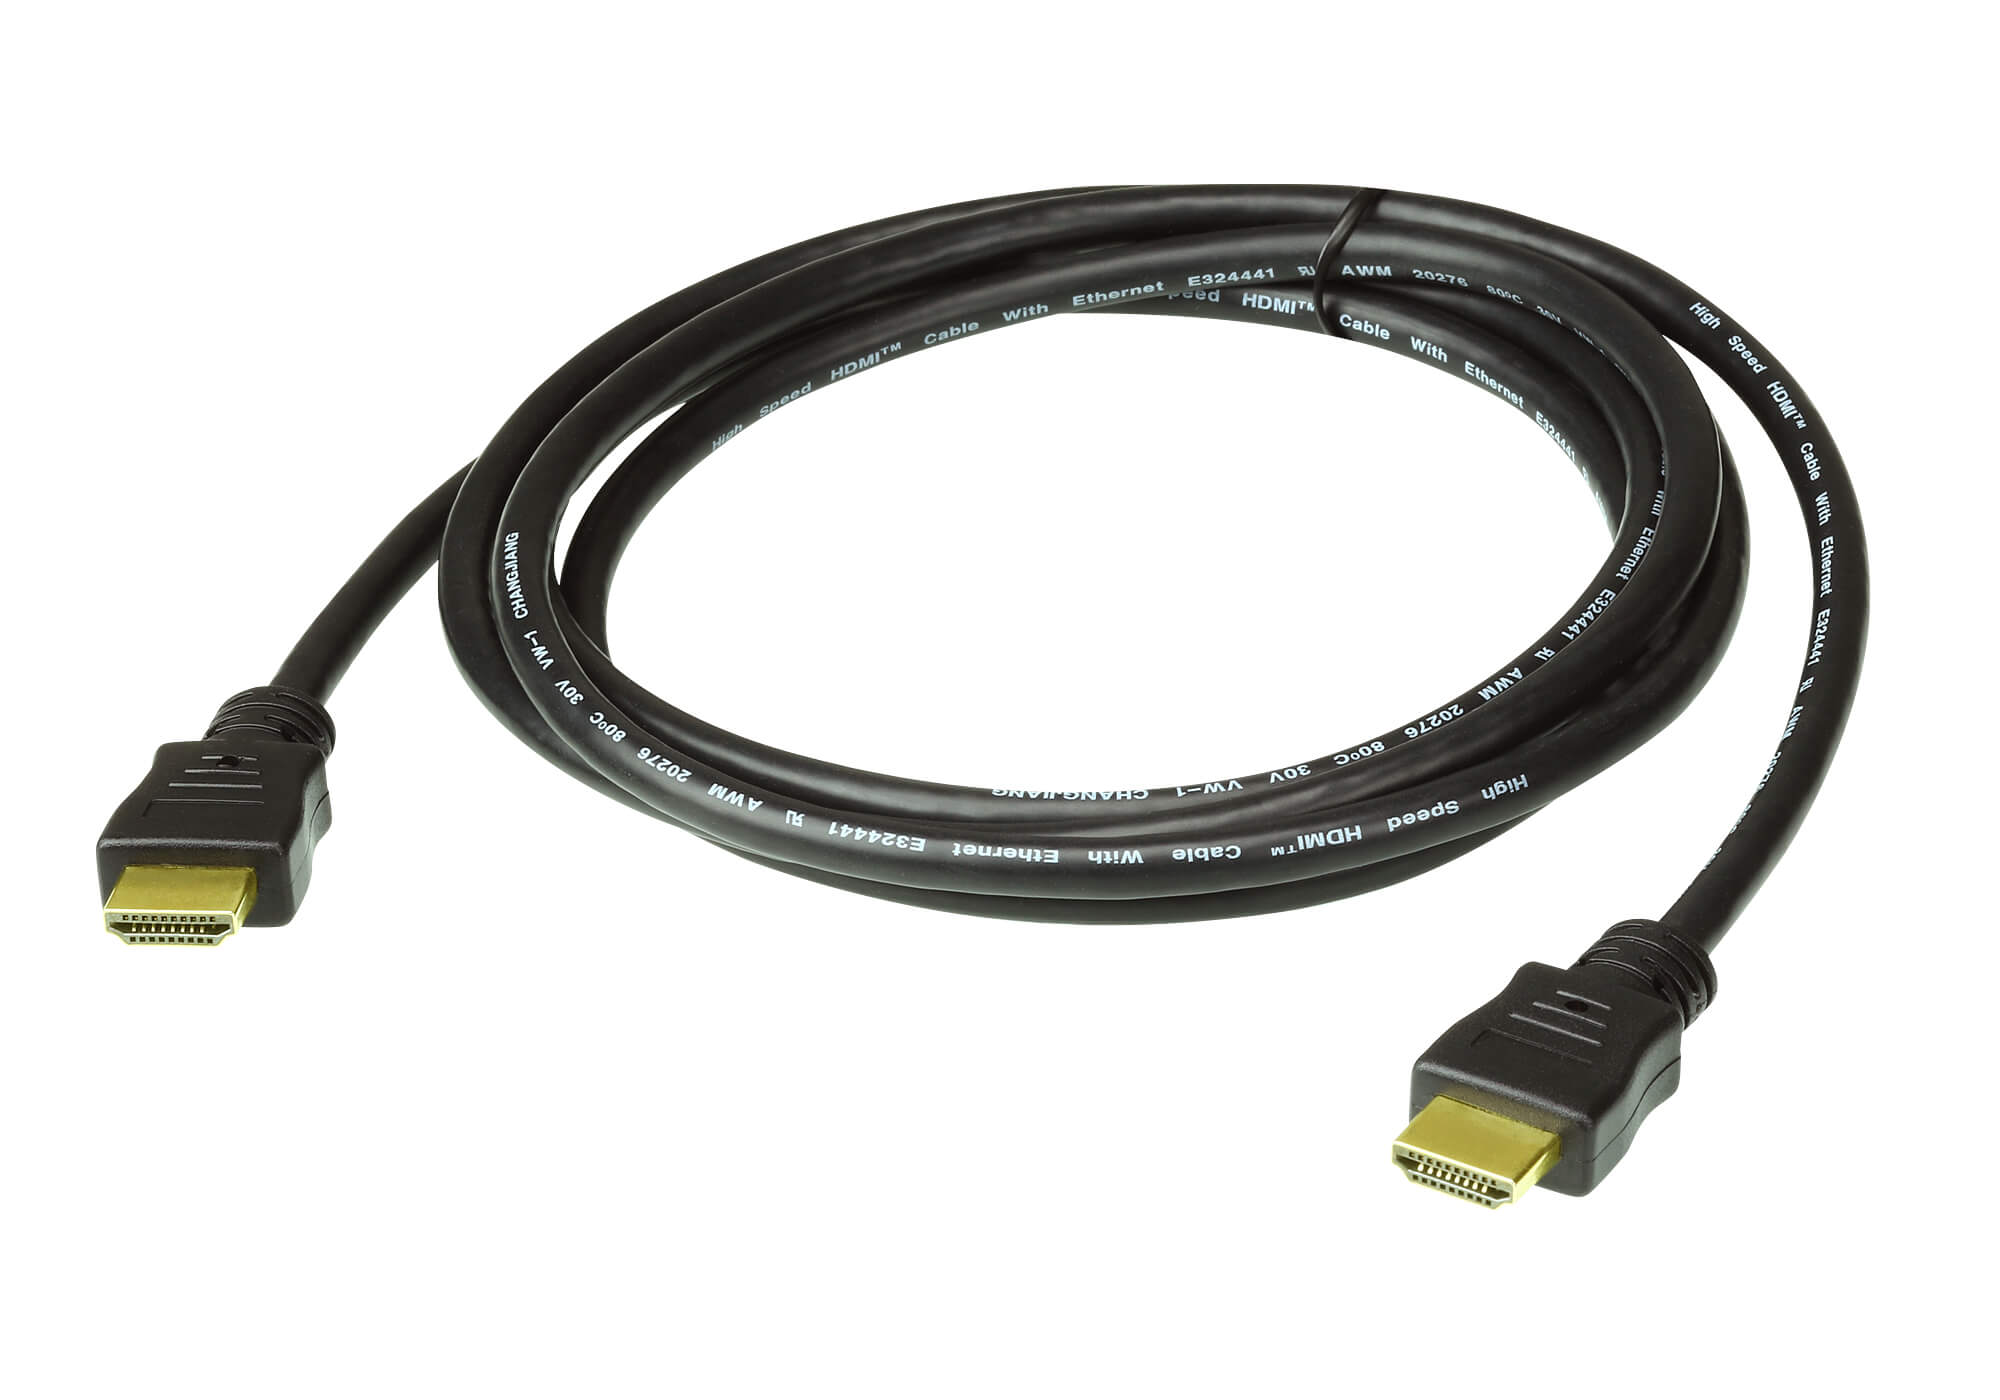 KVM Switches/Aten: Aten, 5M, High, Speed, HDMI, Cable, with, Ethernet., Support, 4K, UHD, DCI, up, to, 4096, x, 2160, @, 30Hz, 